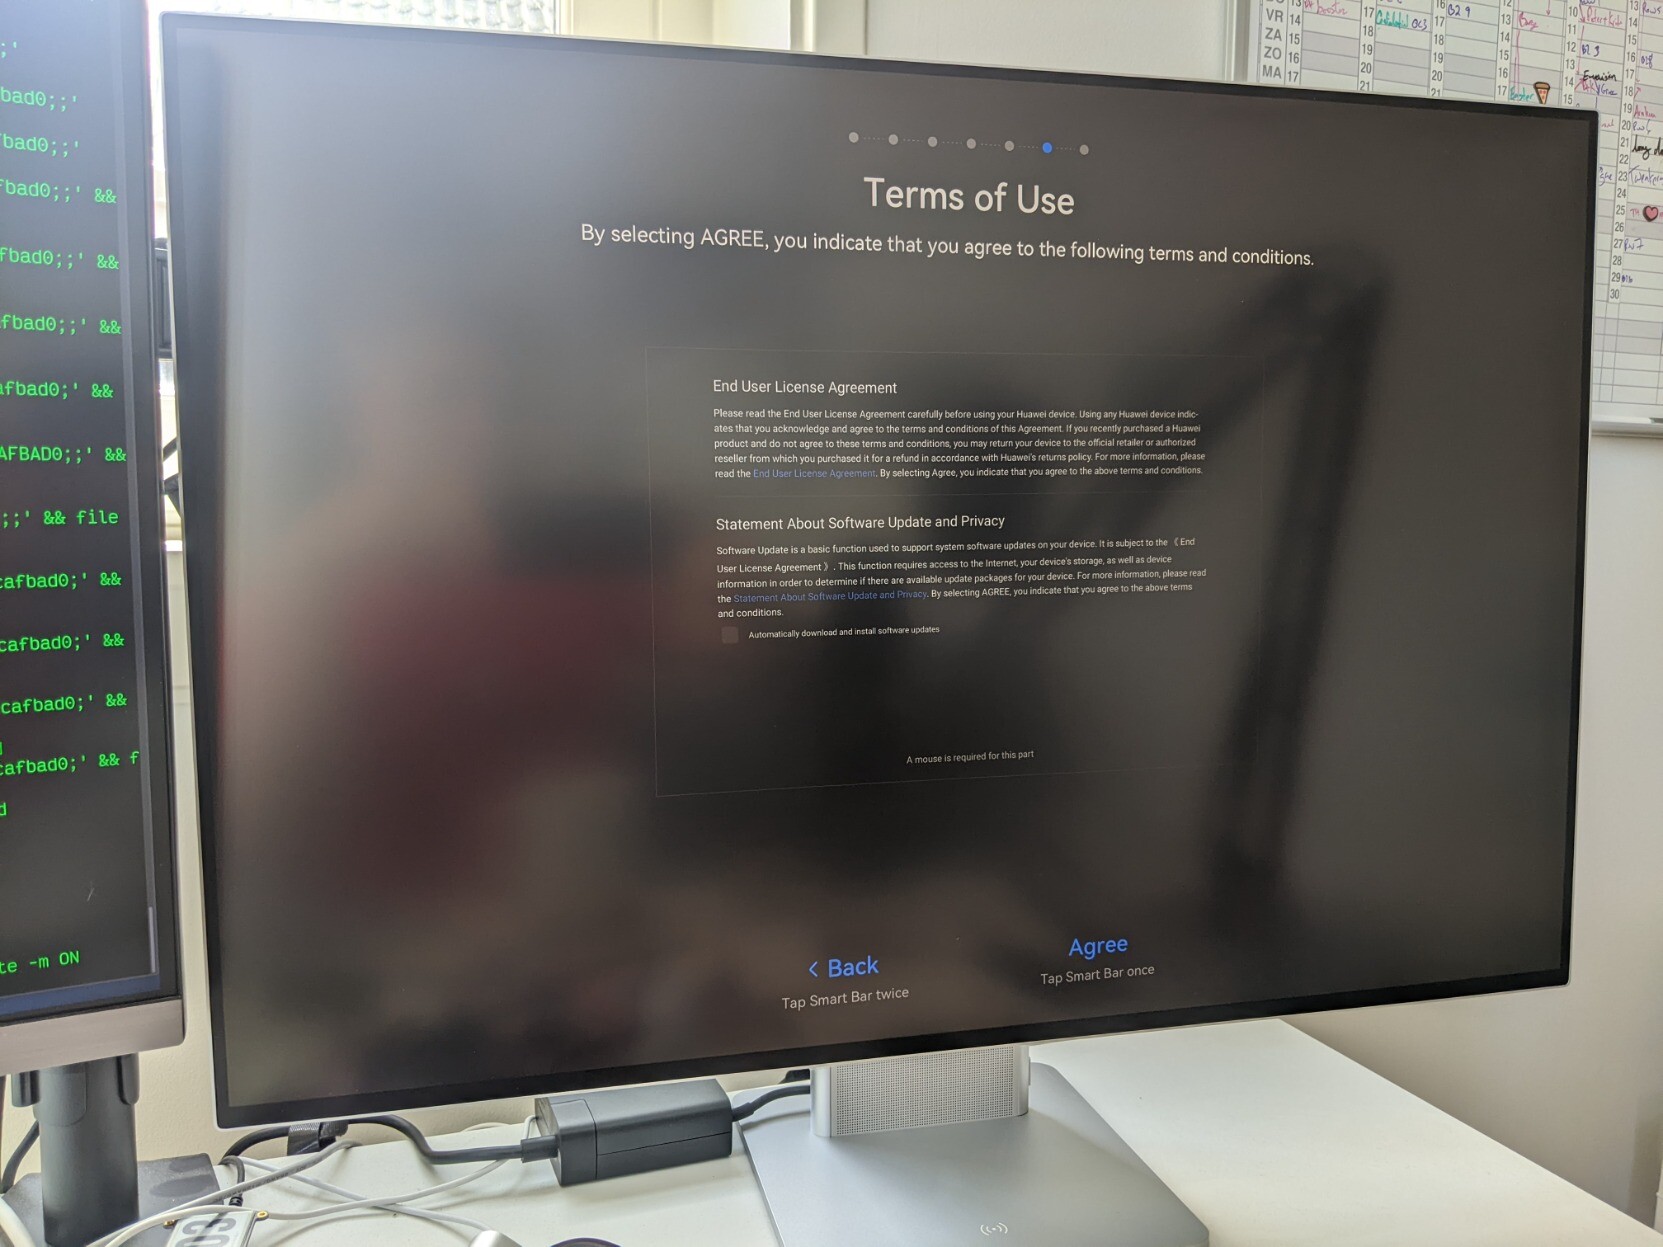 monitor displaying "Terms of Use" as part of its first boot screen